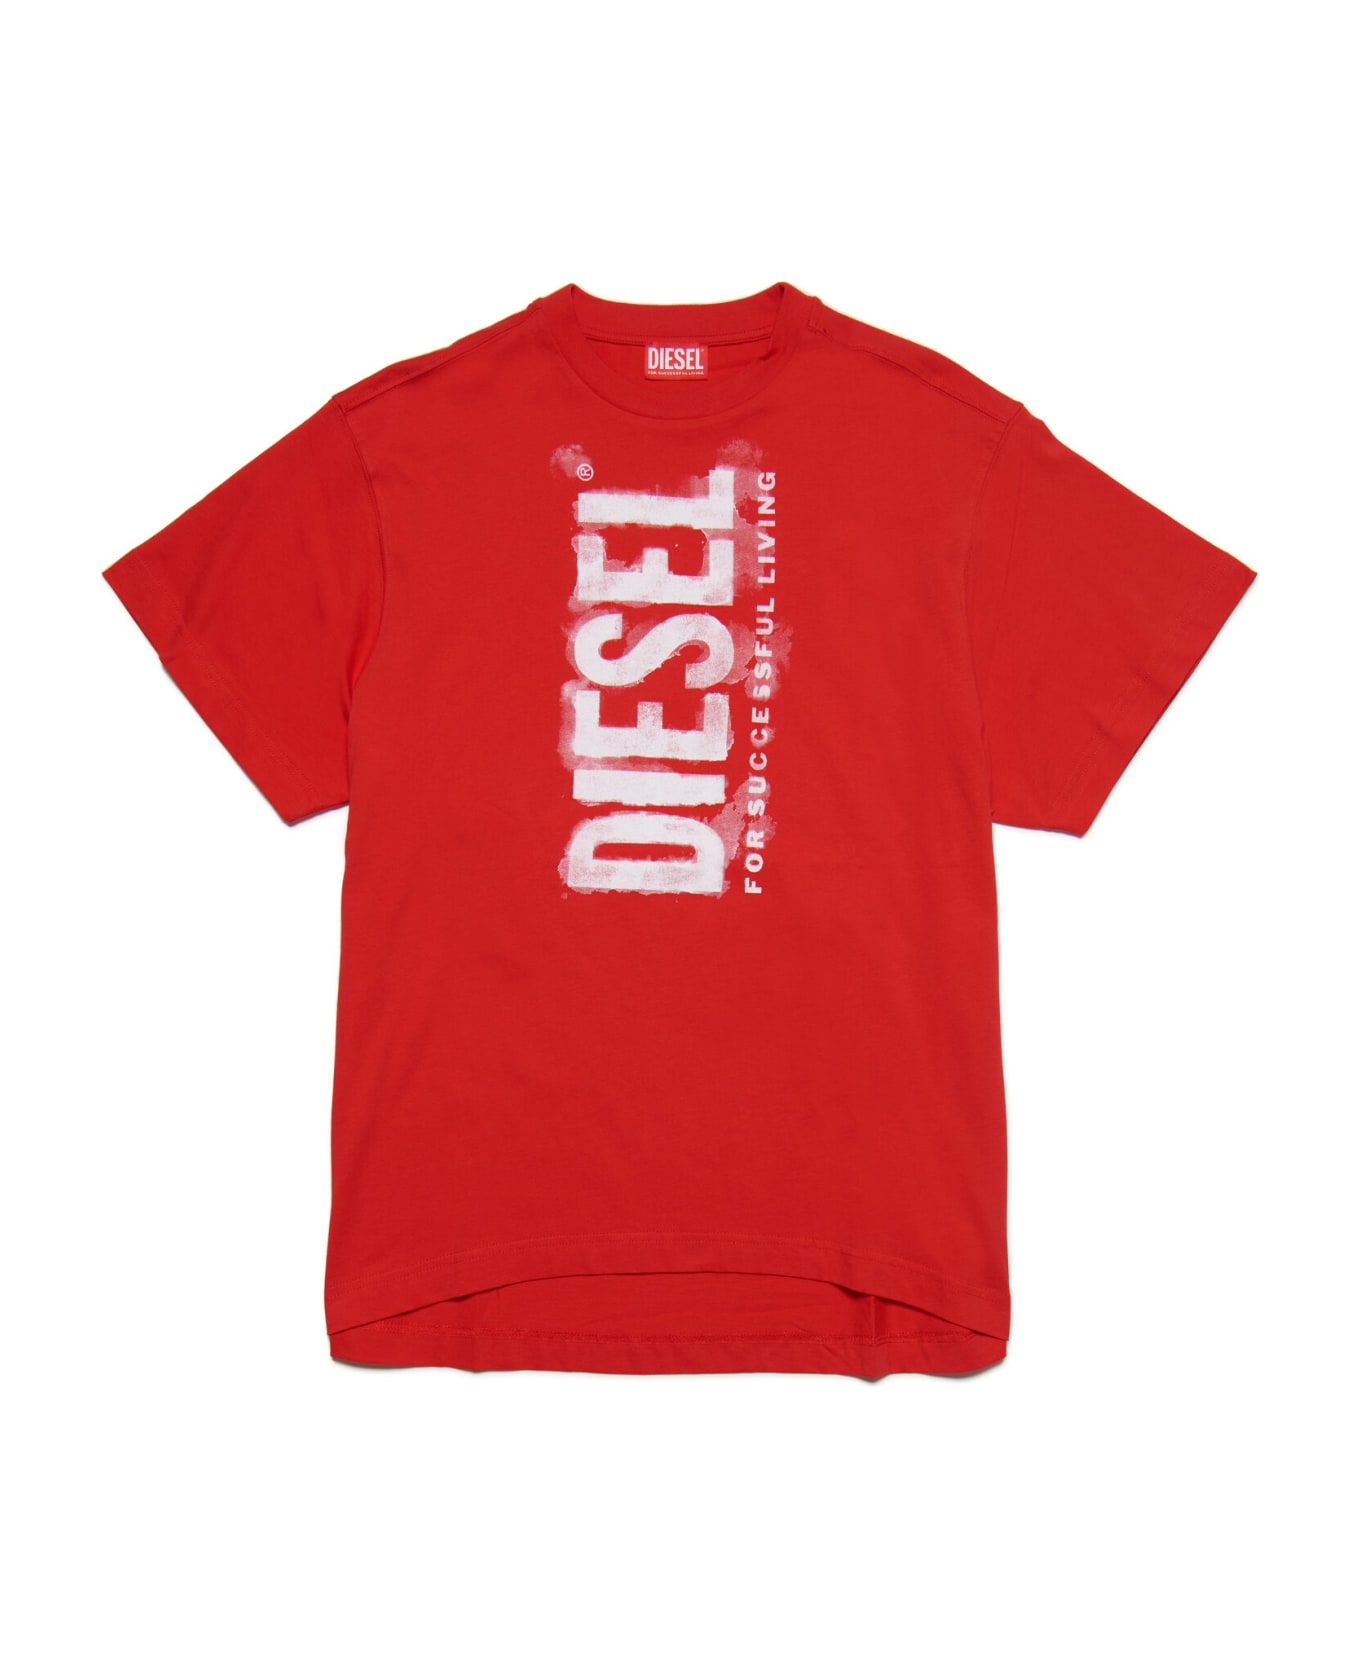 Diesel Dextry Dress Diesel Red Maxi T-shirt Dress With Watercolor Effect Logo - Carnation red